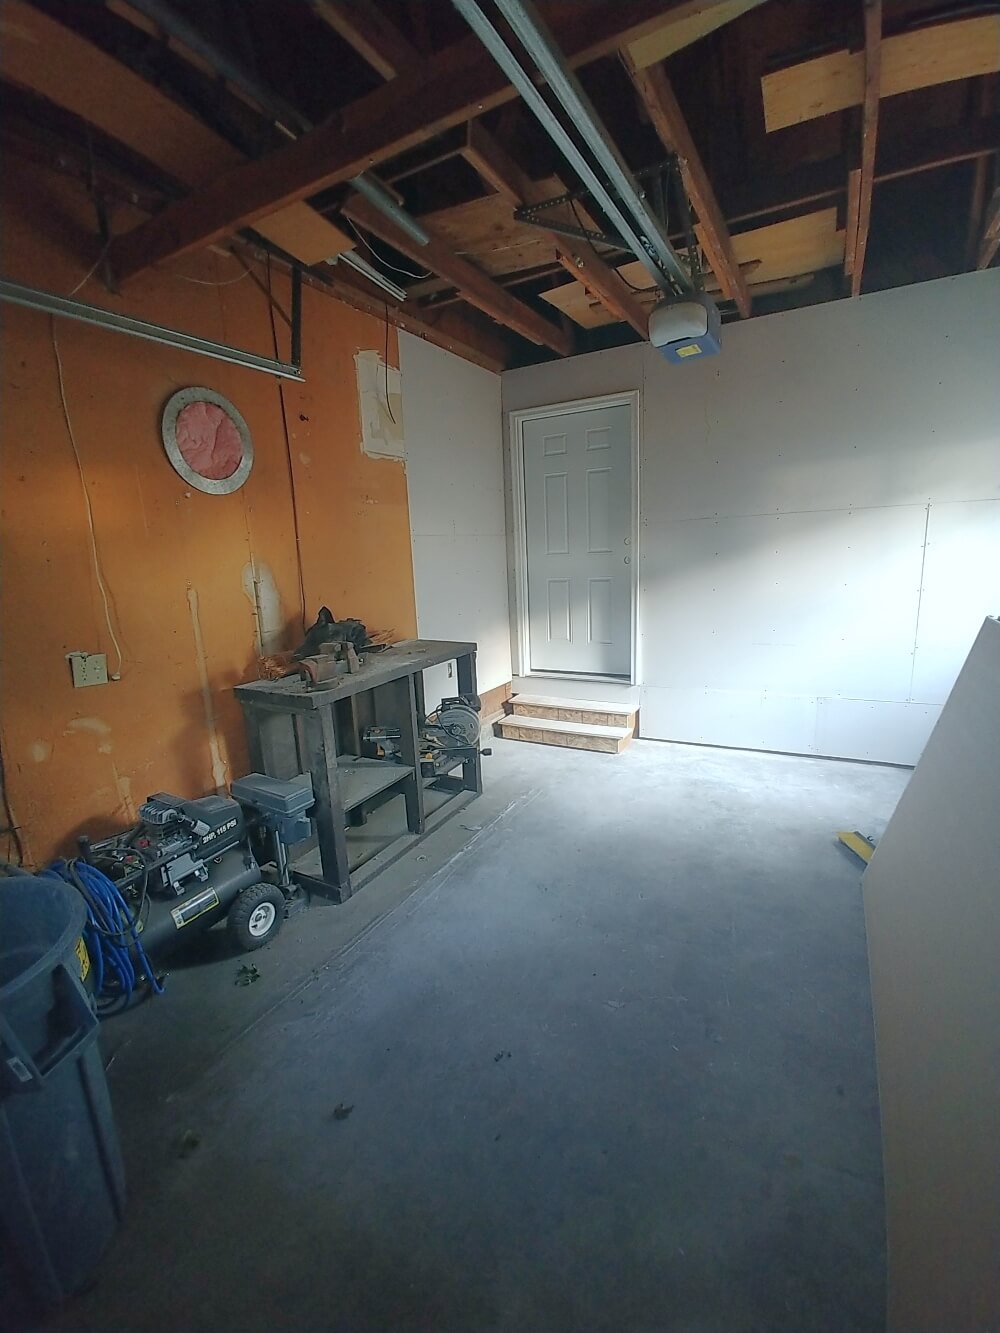 Remodeling the Garage to Create a Workshop